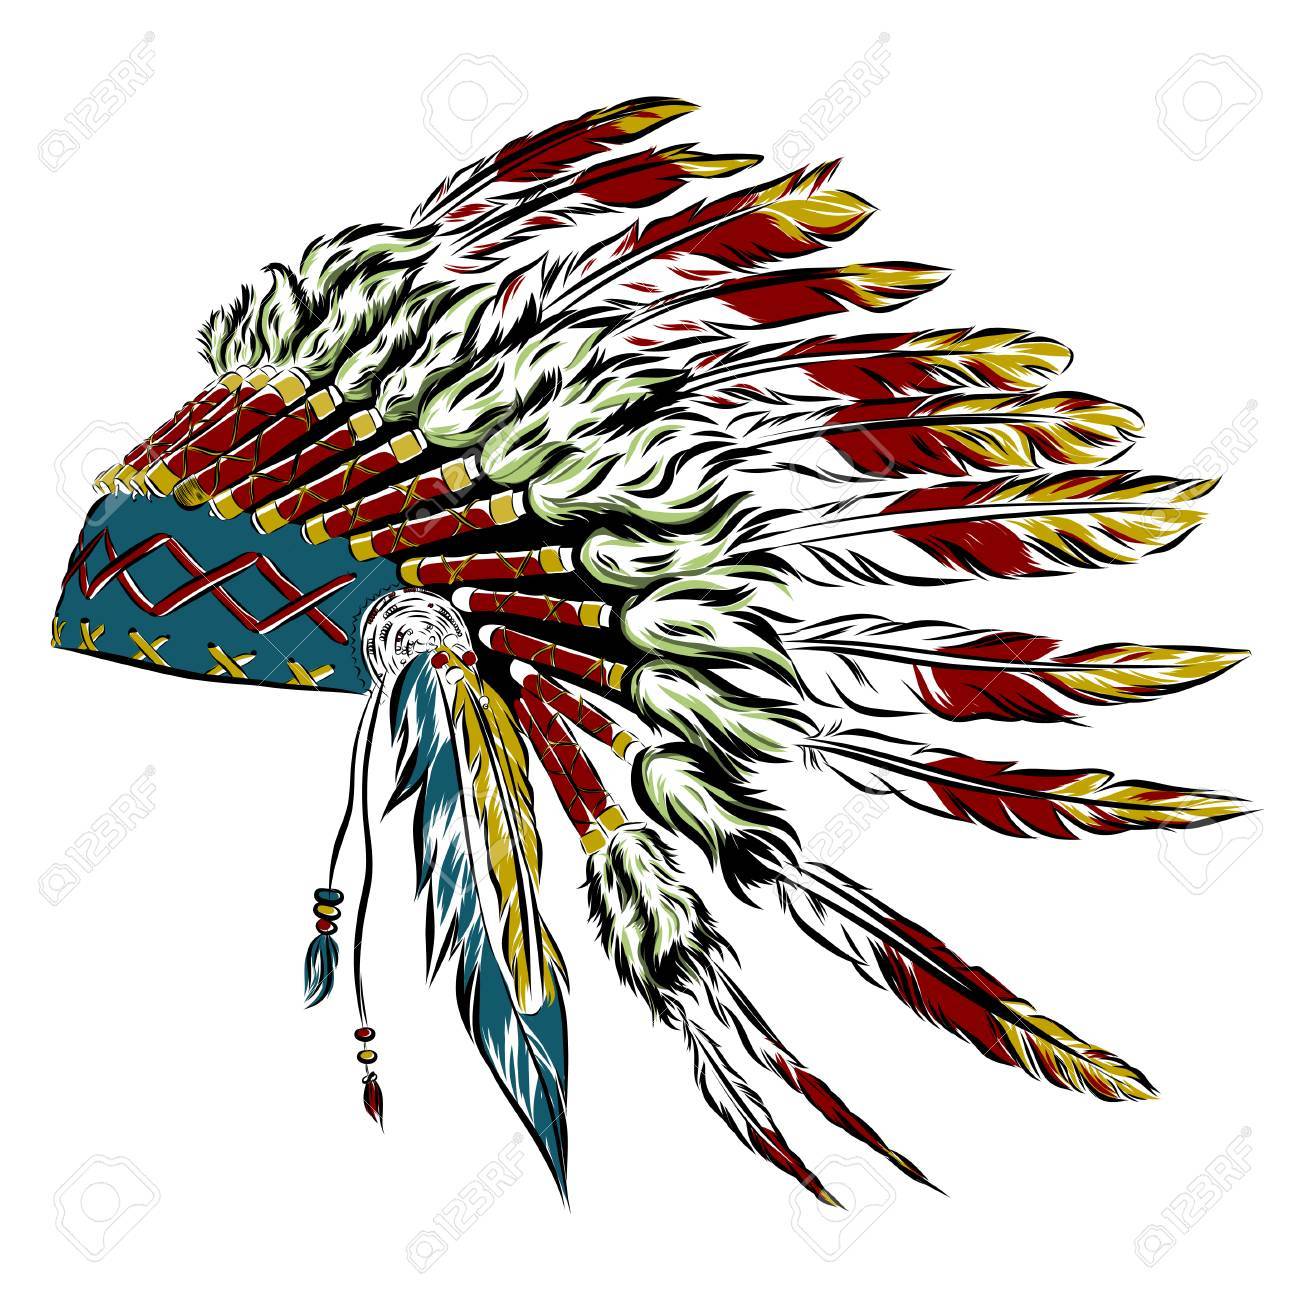 The best free Headdress clipart images. Download from 44 free cliparts ...